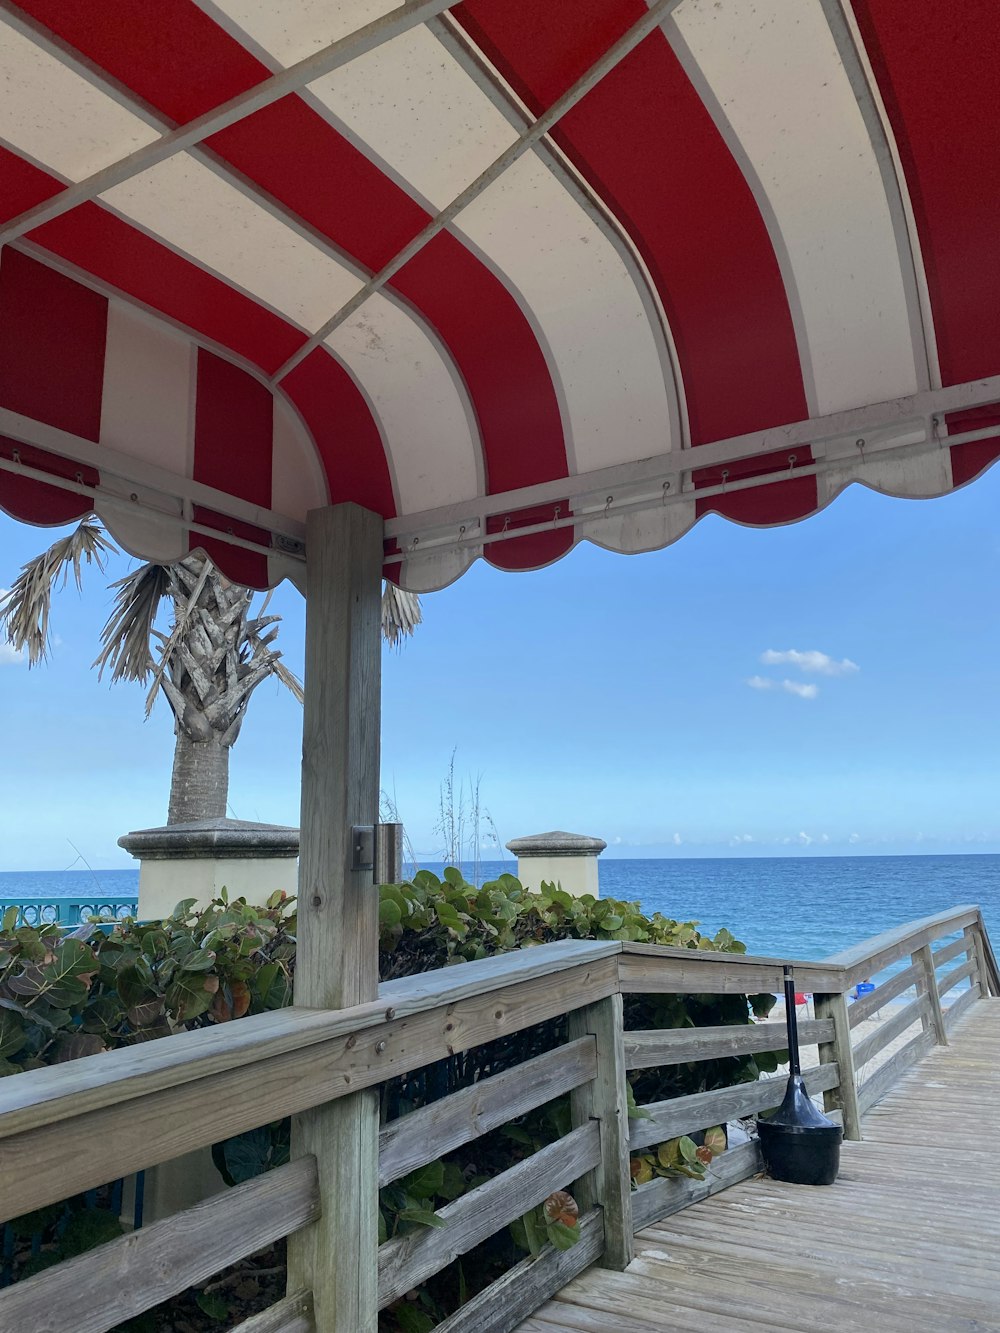 a red and white awning over a wooden deck next to the ocean